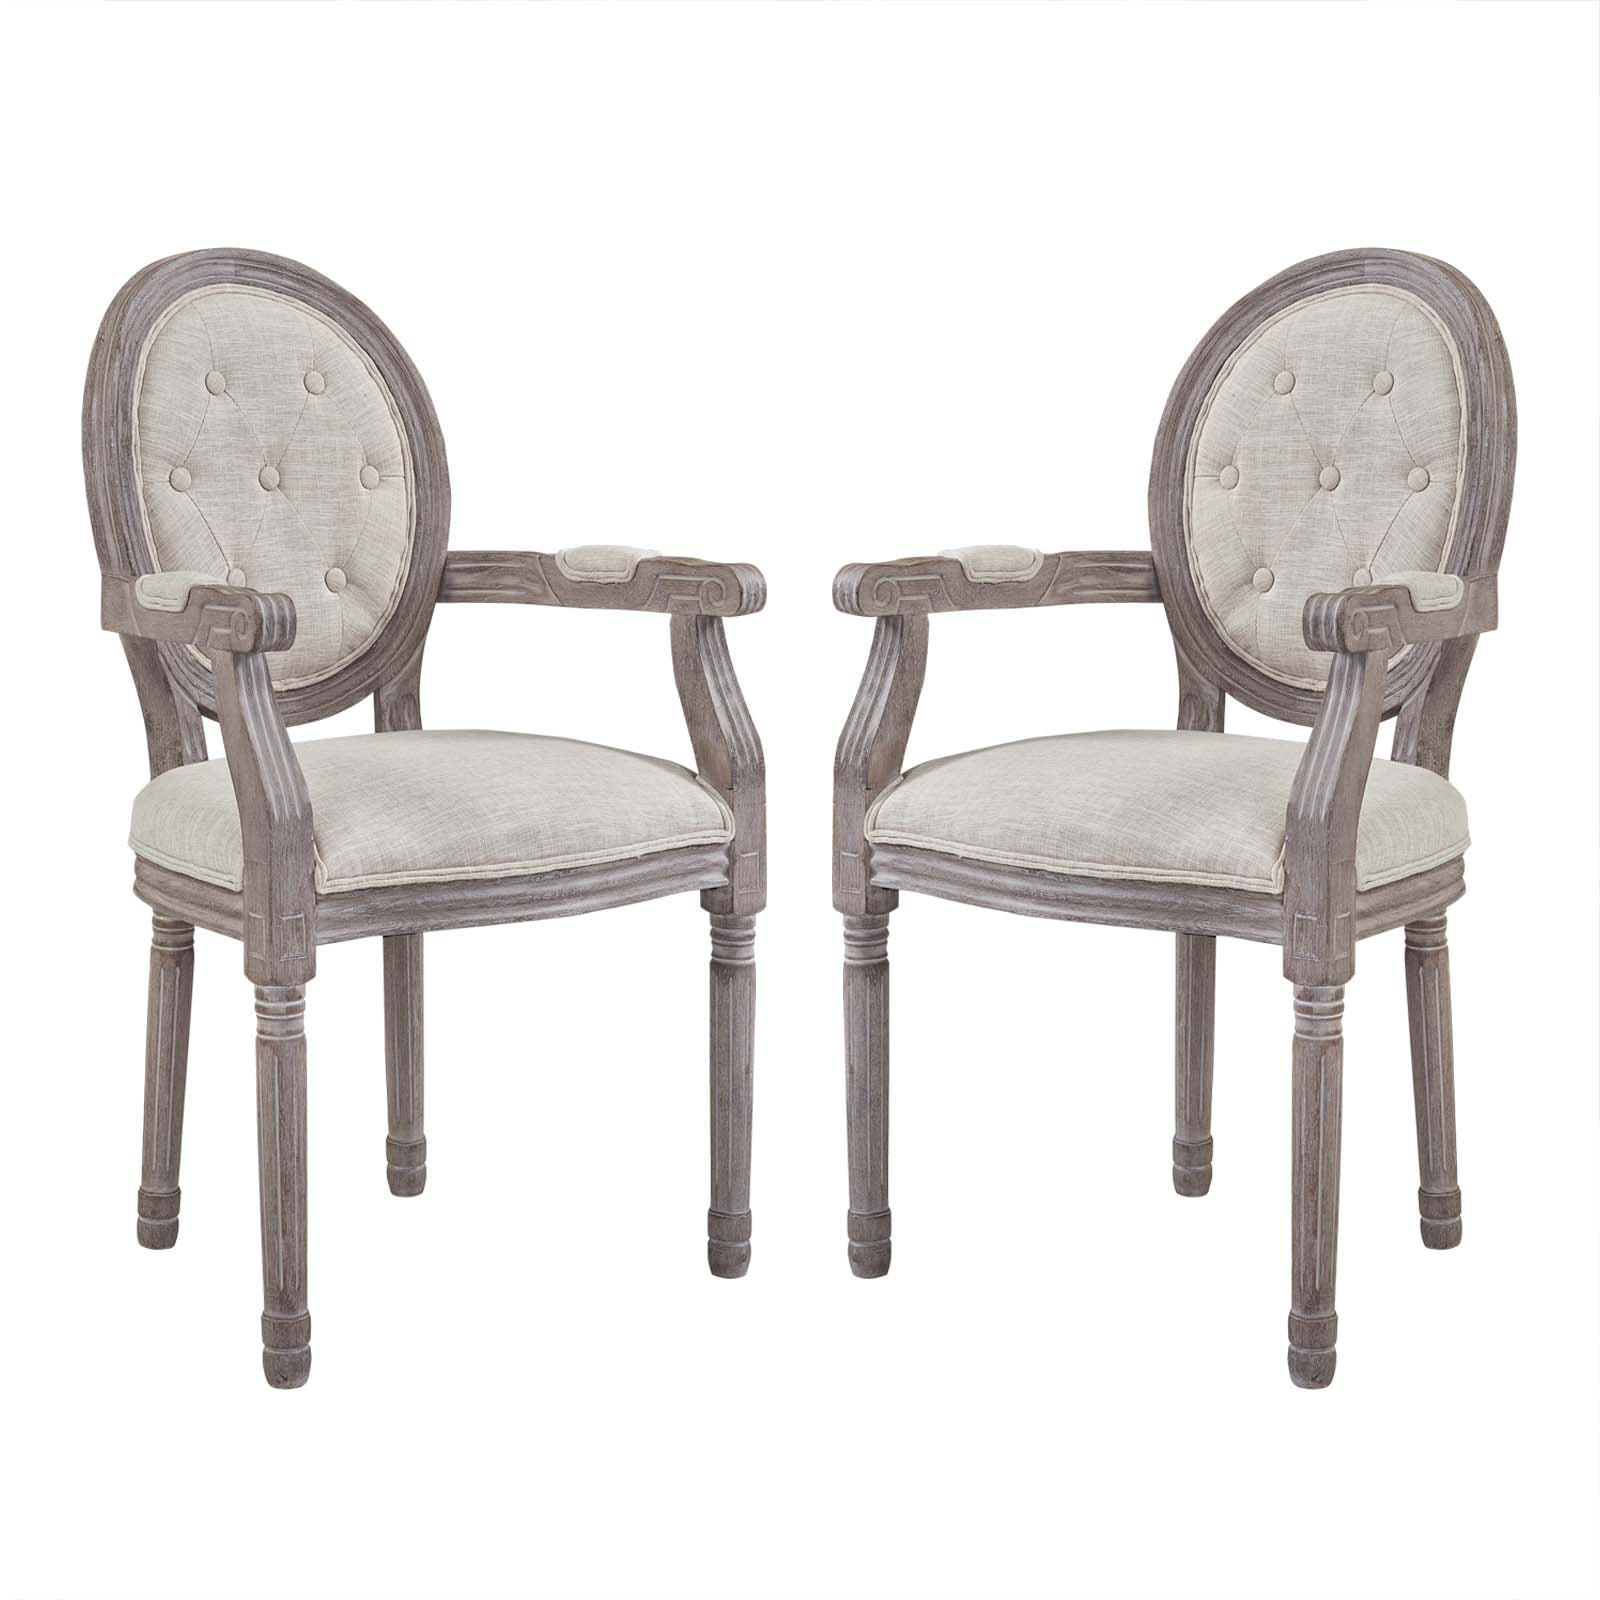 Arise Vintage French Upholstered Fabric Dining Armchair Set of 2 - East Shore Modern Home Furnishings